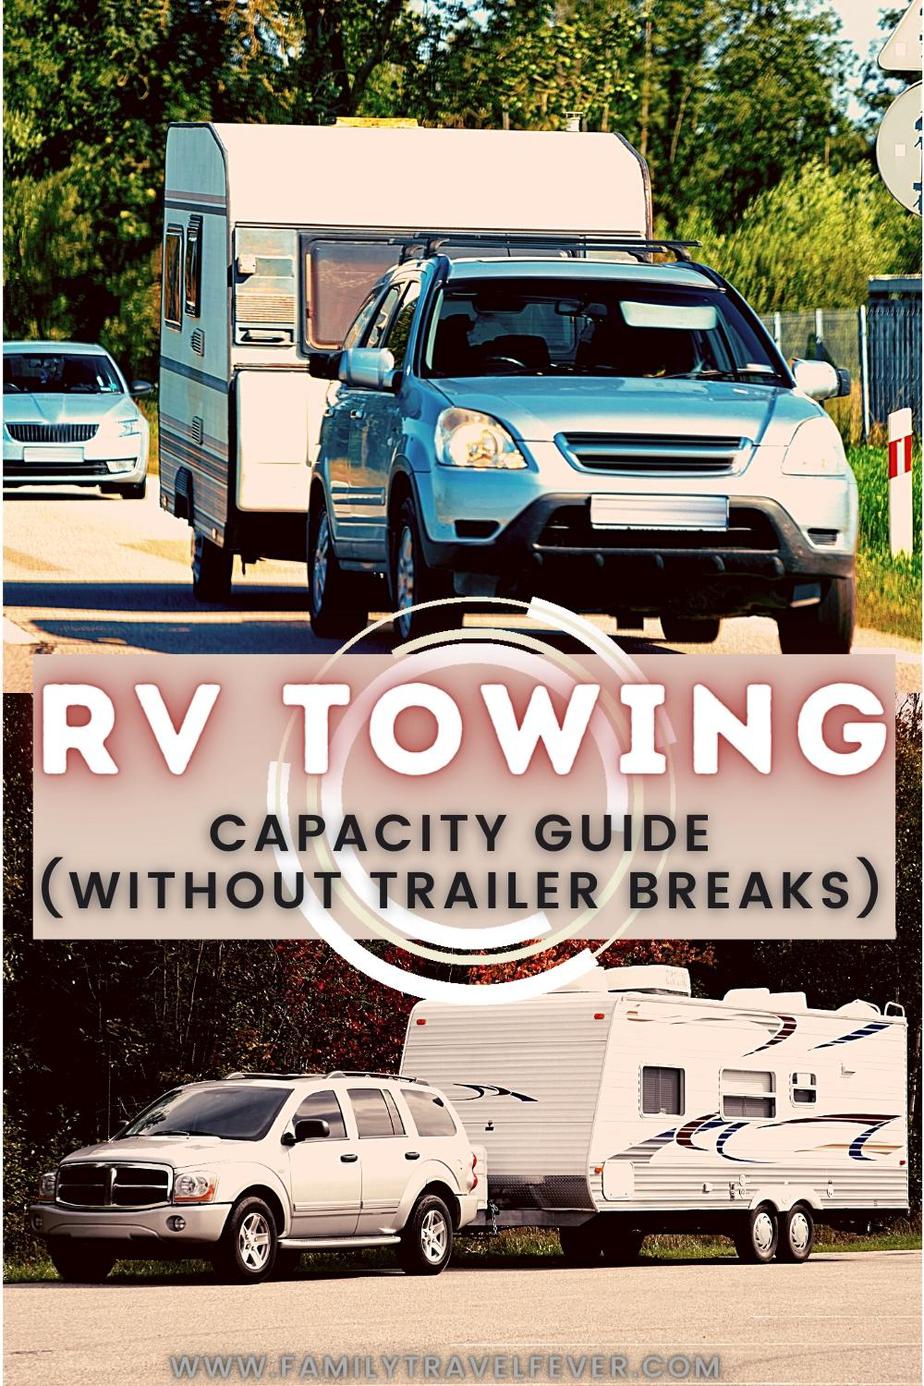 A collage of two suv pulling a camper, caravan trailer